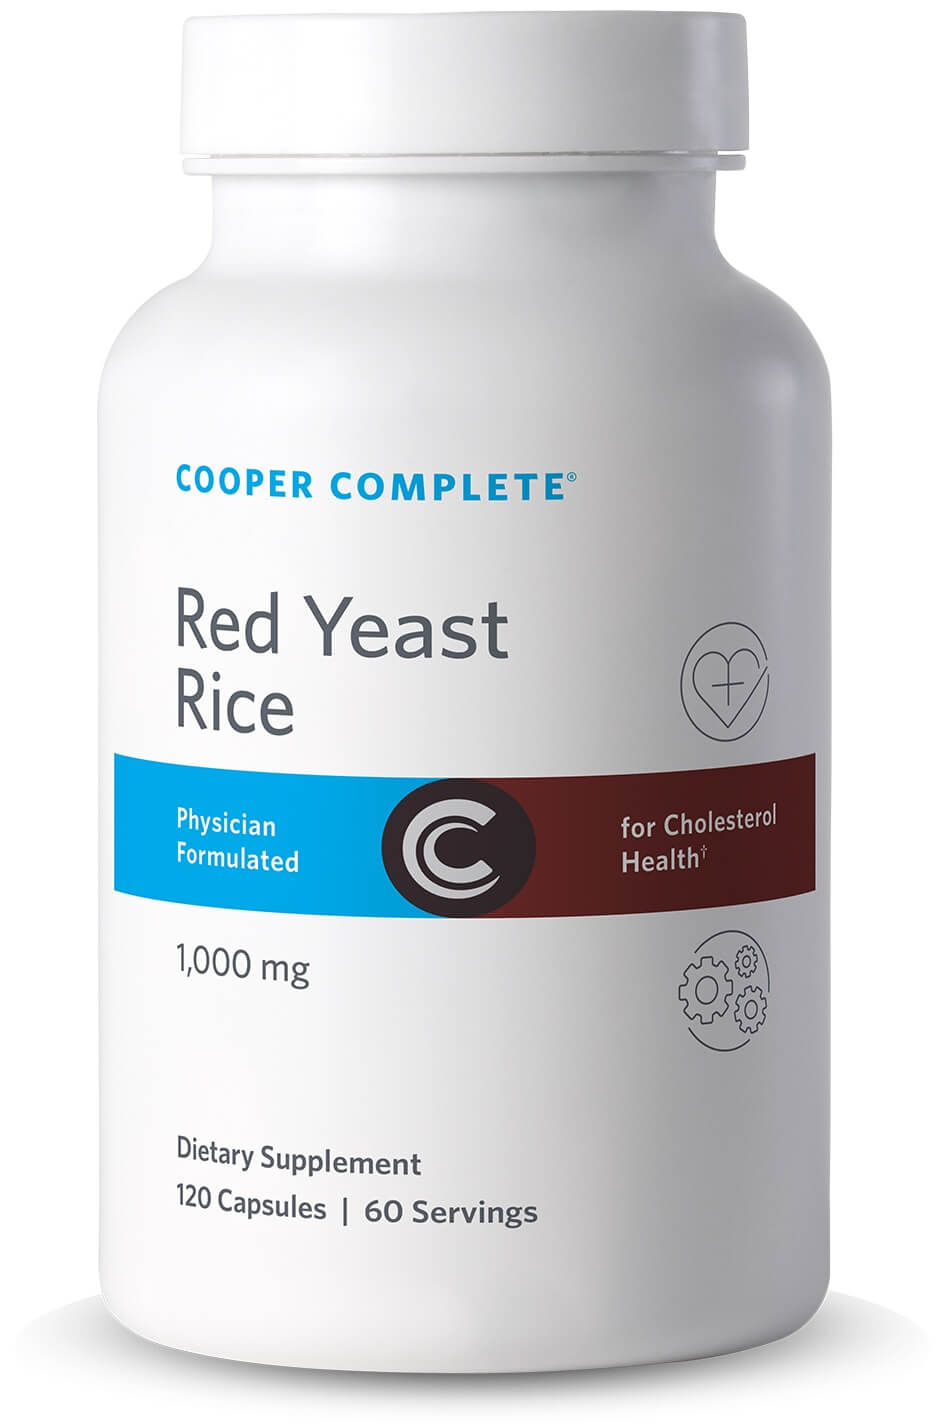 Photo of Cooper Complete Red Yeast Rice Supplement bottle